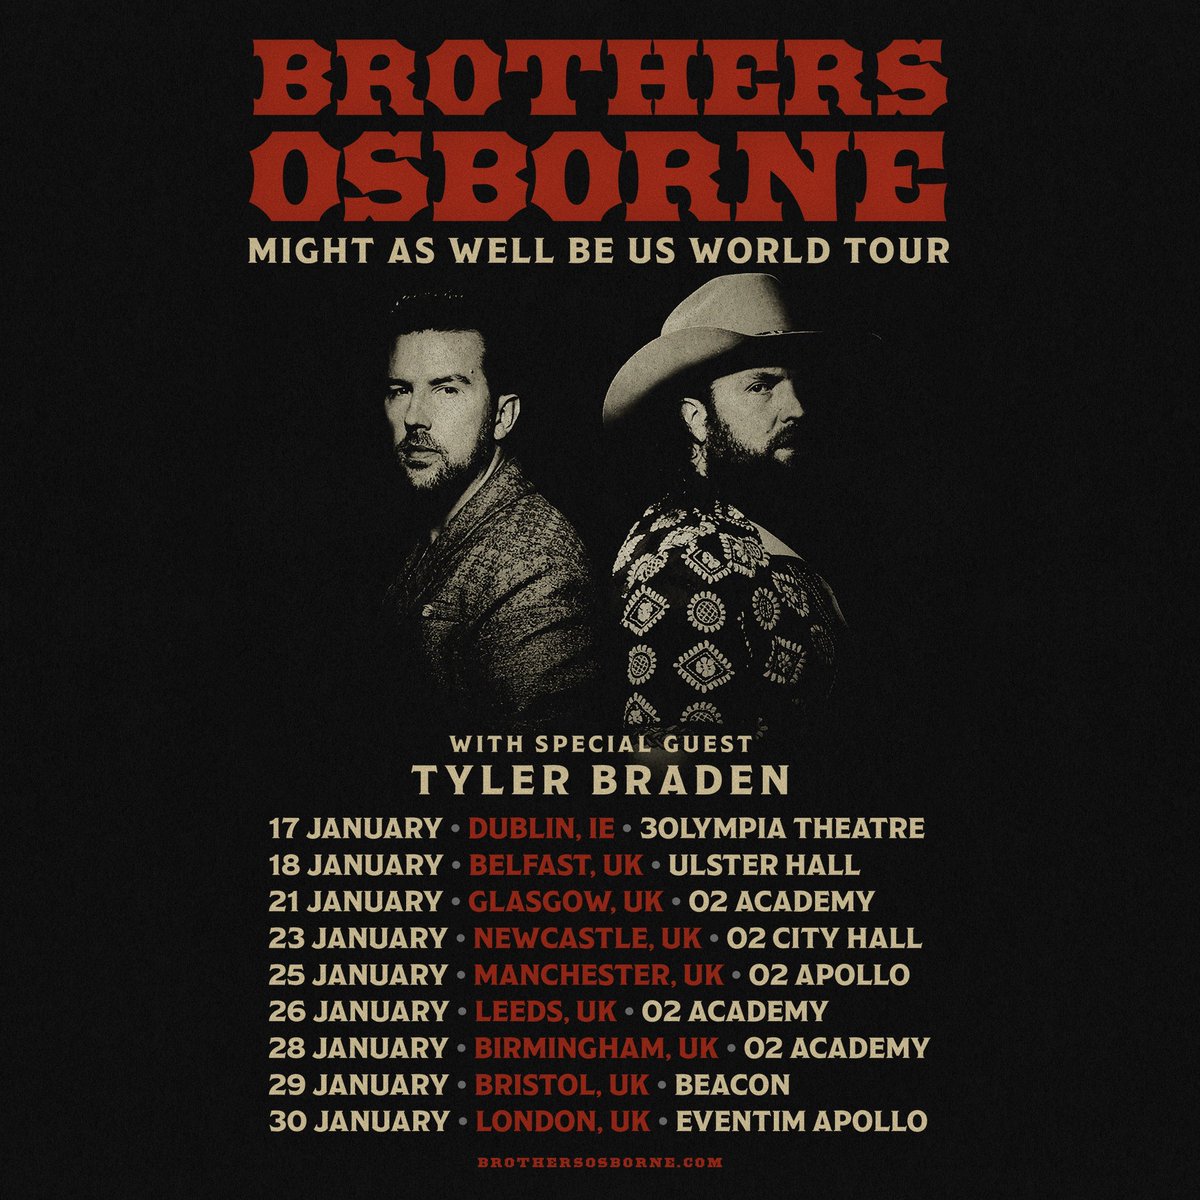 Grammy-award winning country duo @brothersosborne are bringing their 'Might As Well Be Us' World Tour to The UK early next year! Tickets for their January tour go on general sale this Friday at 10am: gigseekr.com/tour/7q8